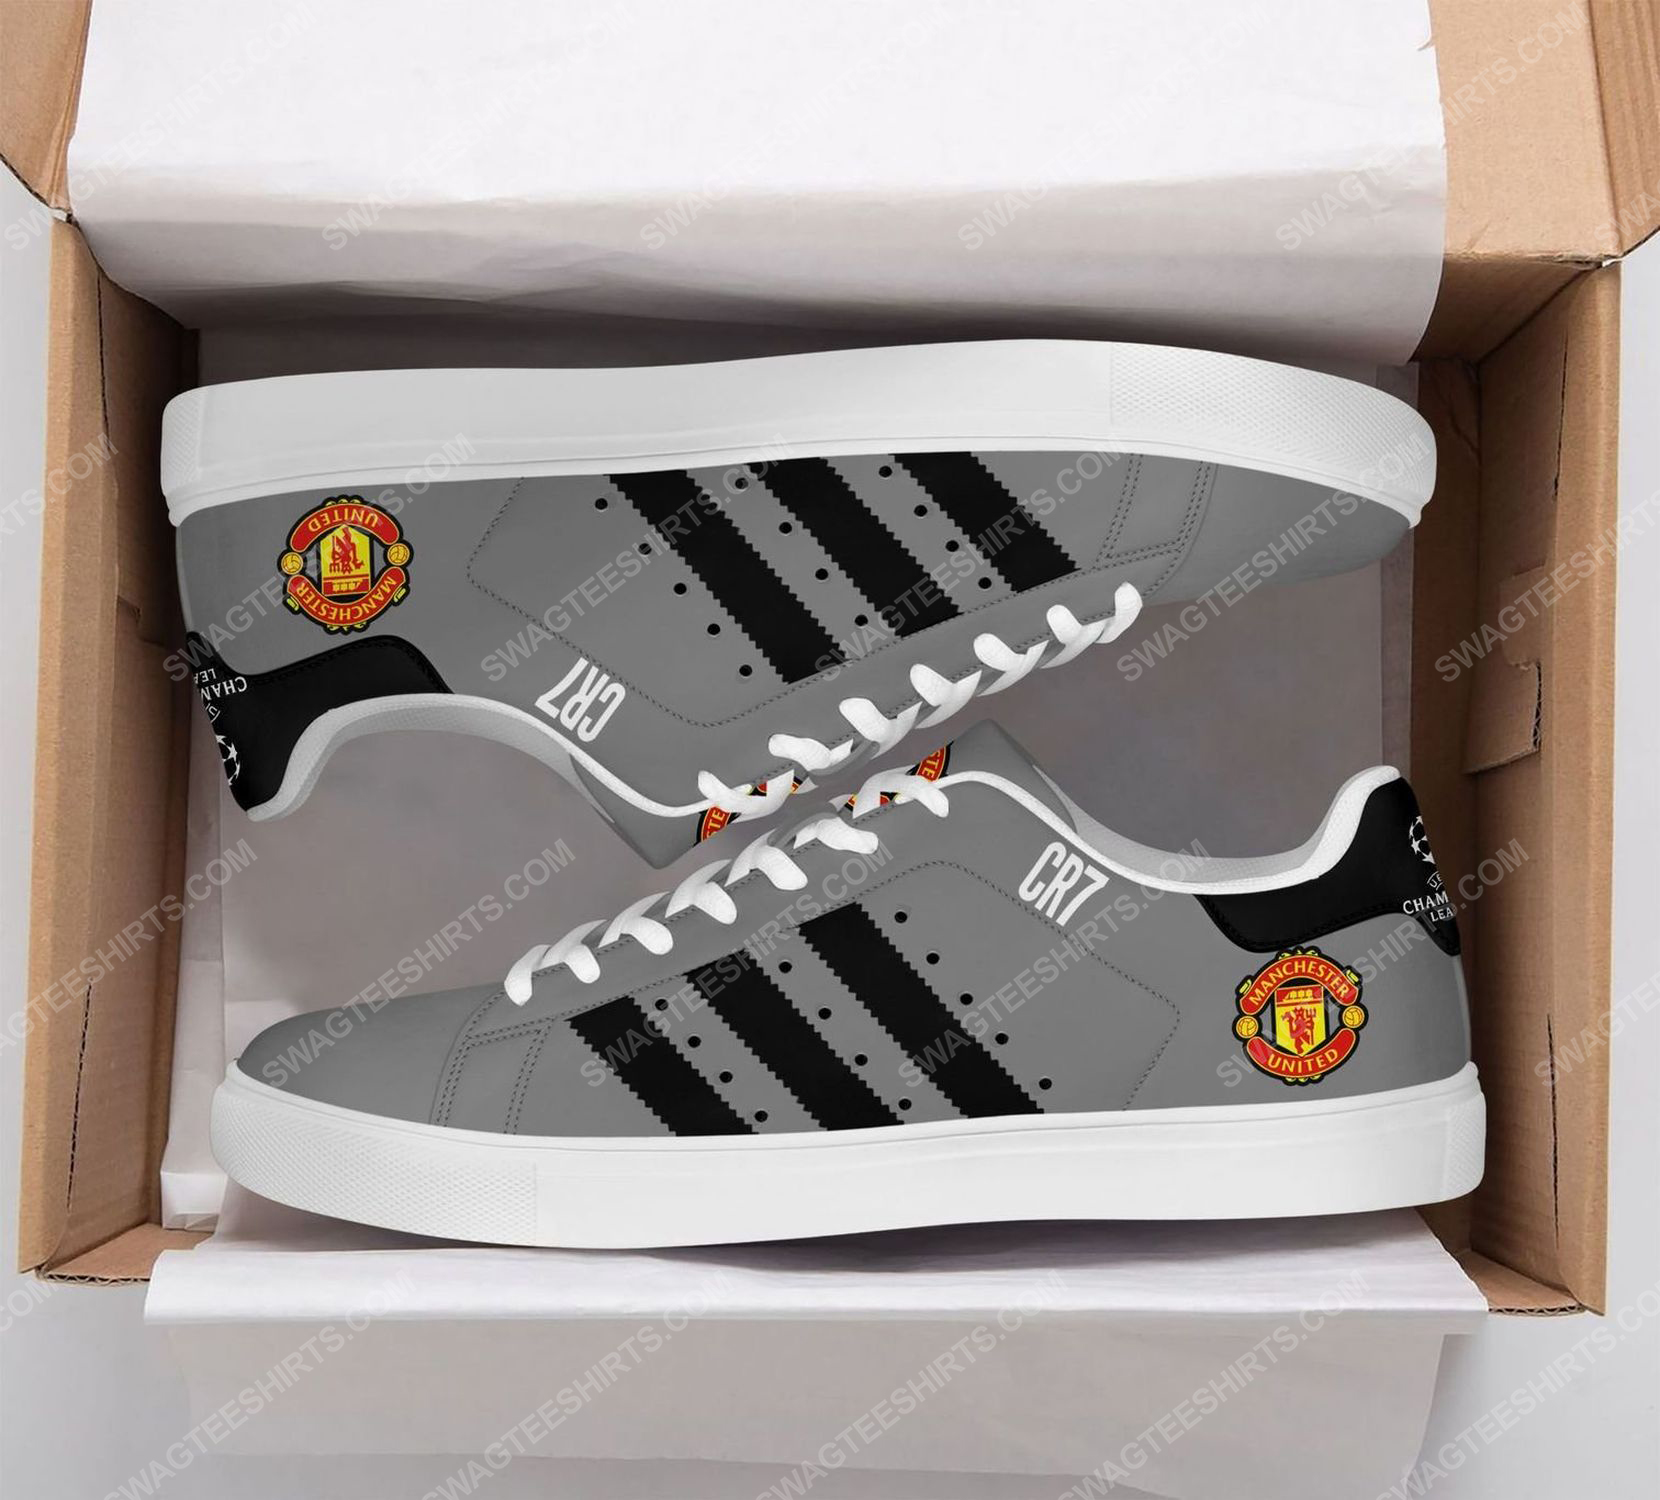 Manchester united football club stan smith shoes 2